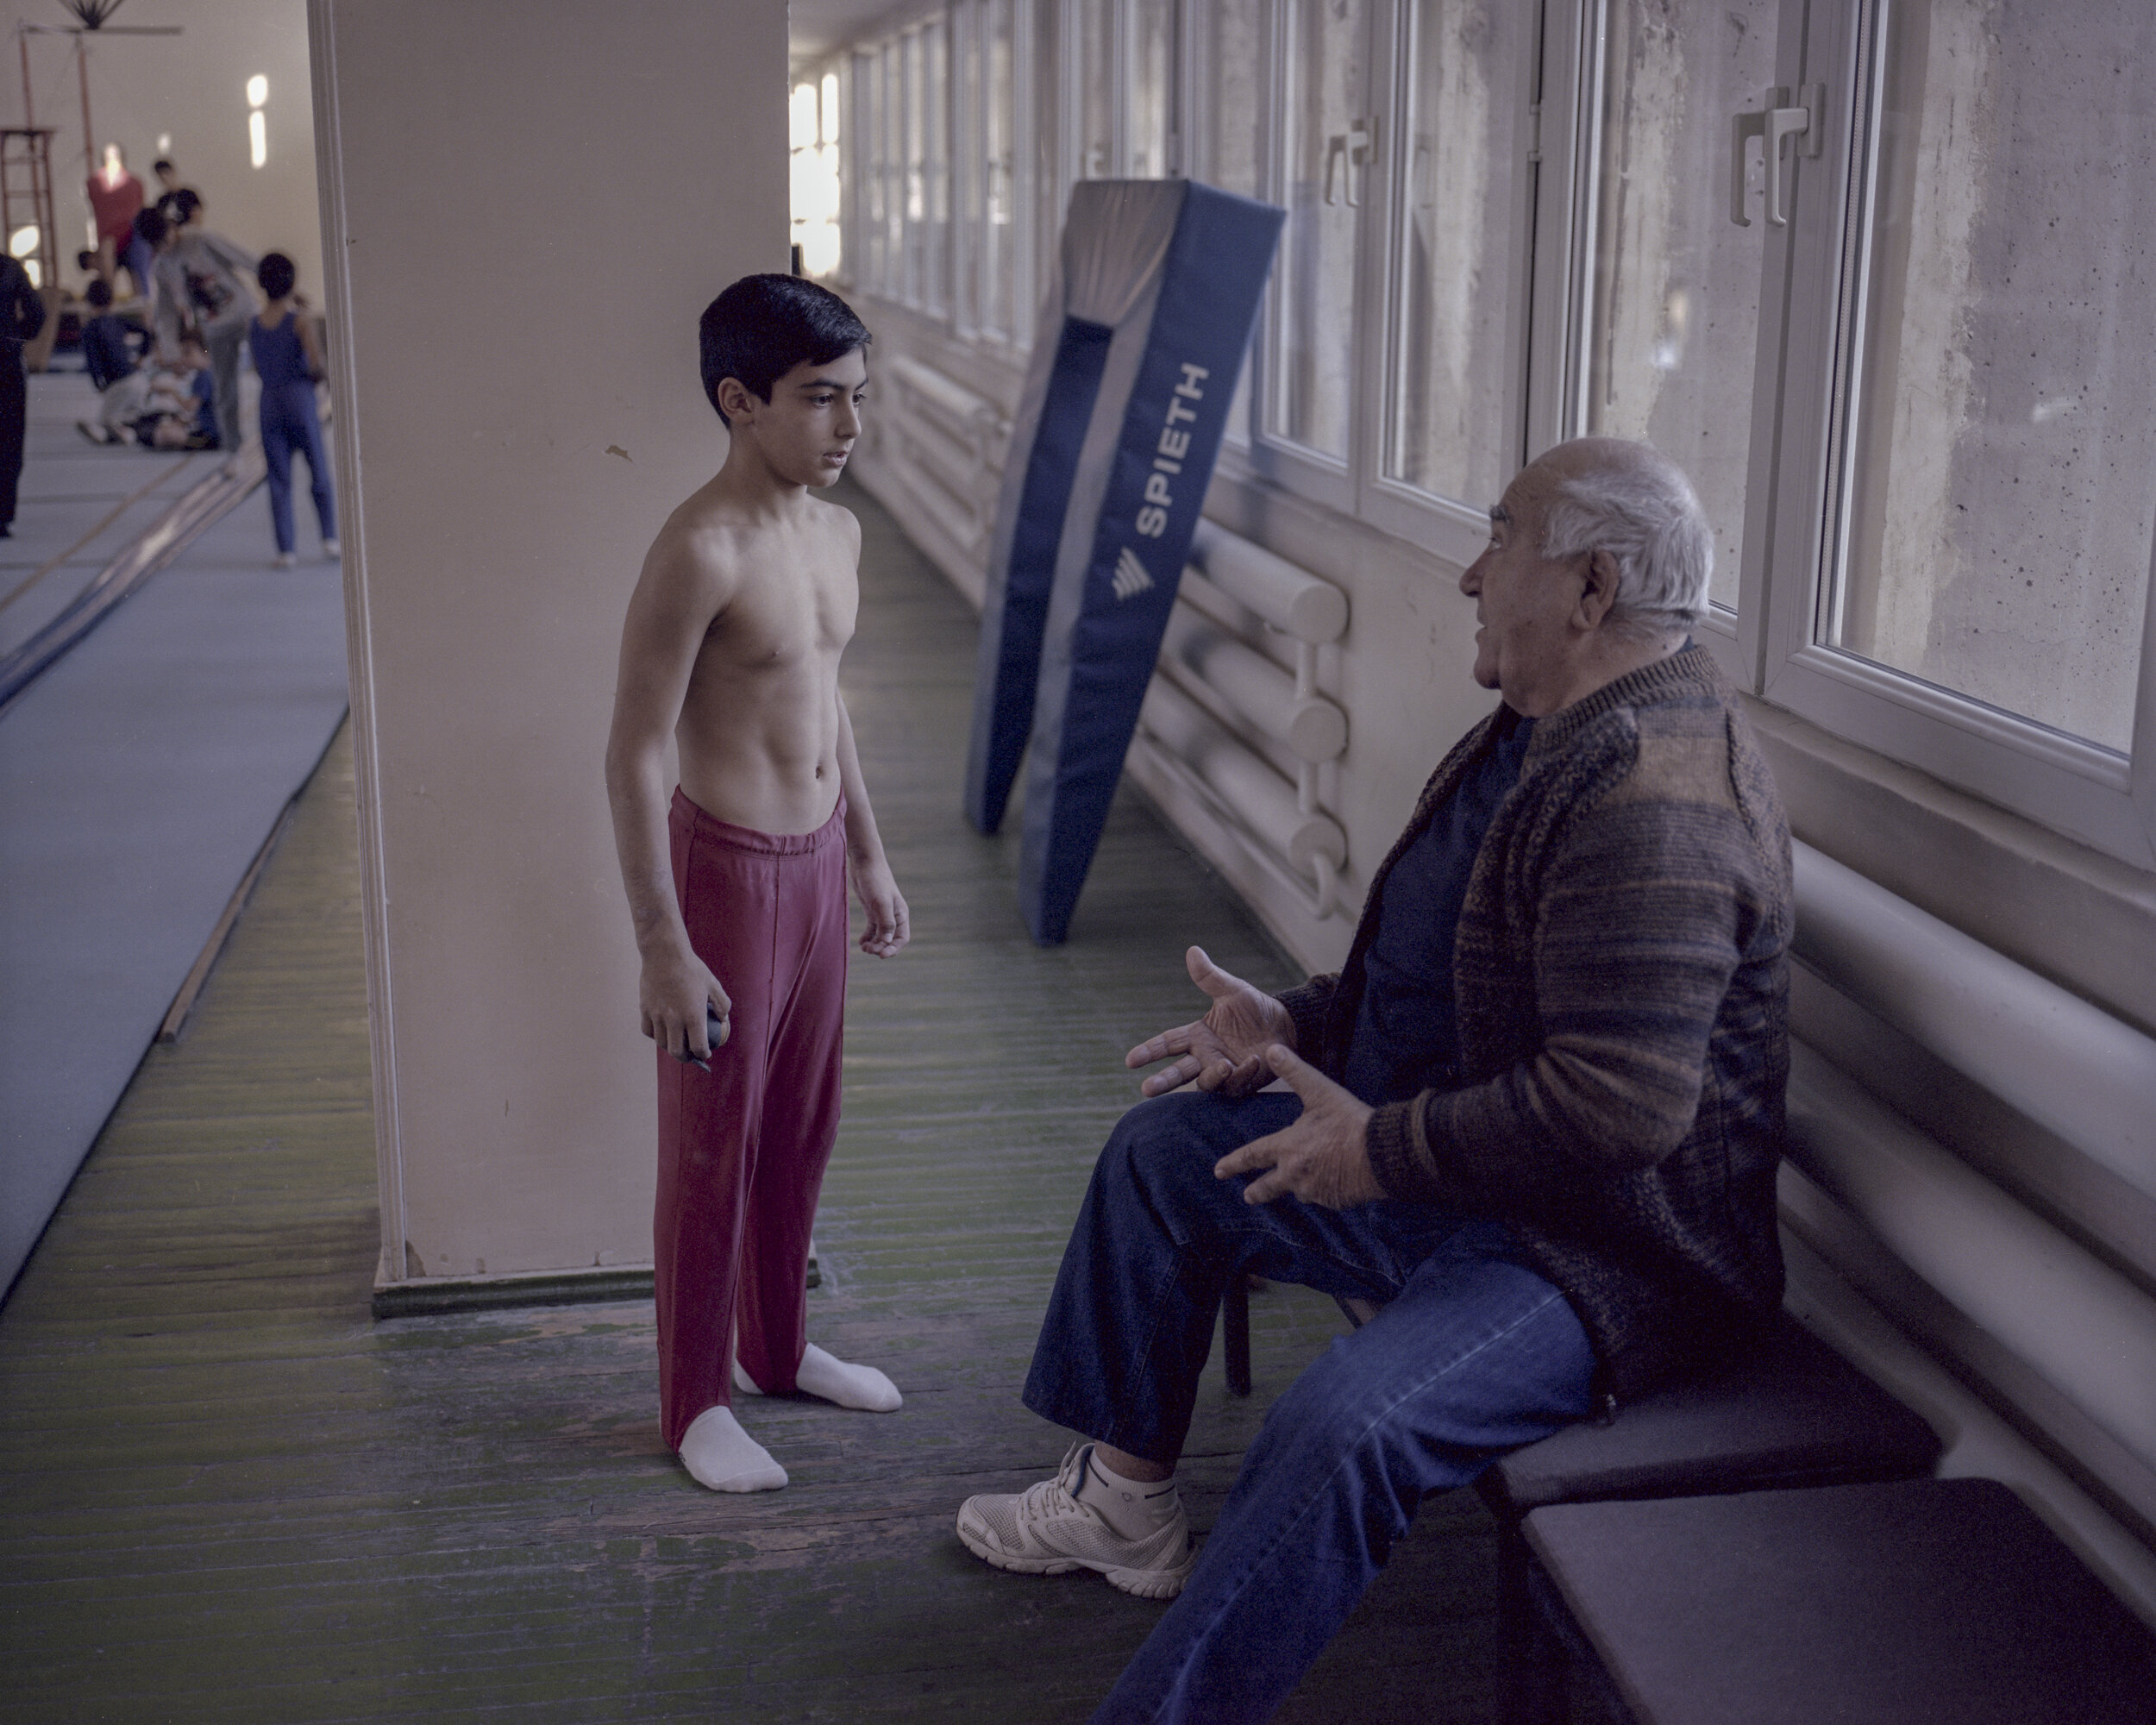   He is Robert Gyulumyan, 12 years old multiple champions in gymnastics. Everyone calls him Maugl because he can do extraordinary jumps and exercises with his body. Maugli trains every day 5-6 hours in the Hrant Shahinyan Sport School in Yerevan. He 